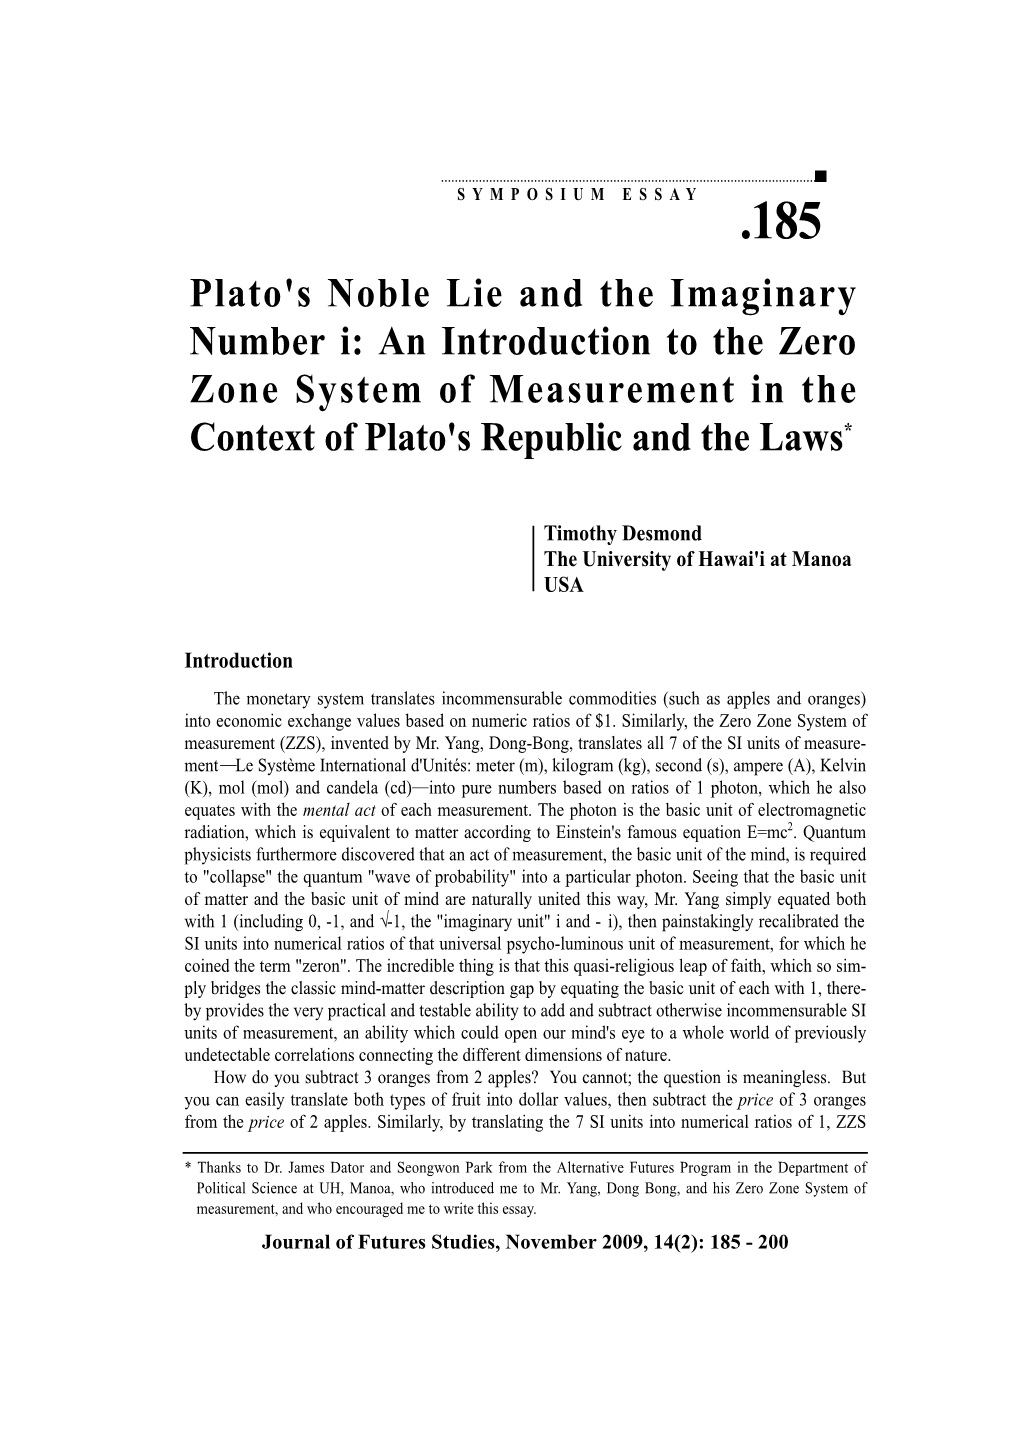 Plato's Noble Lie and the Imaginary Number I: an Introduction to the Zero Zone System of Measurement in the Context of Plato's Republic and the Laws*